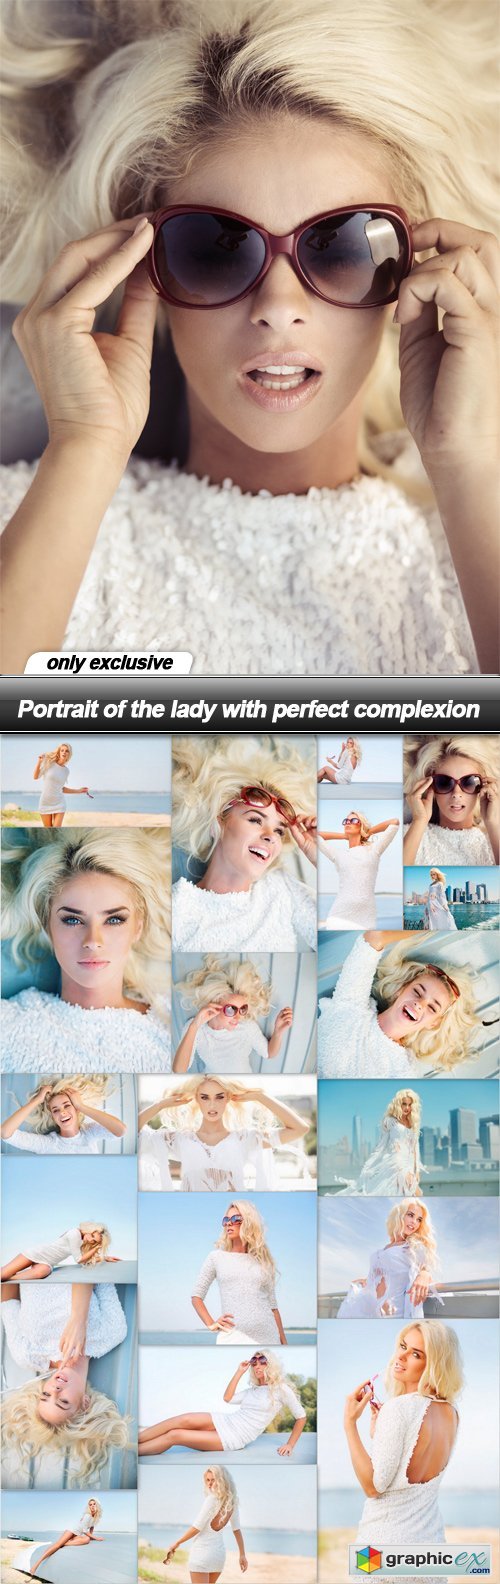 Portrait of the lady with perfect complexion - 20 UHQ JPEG